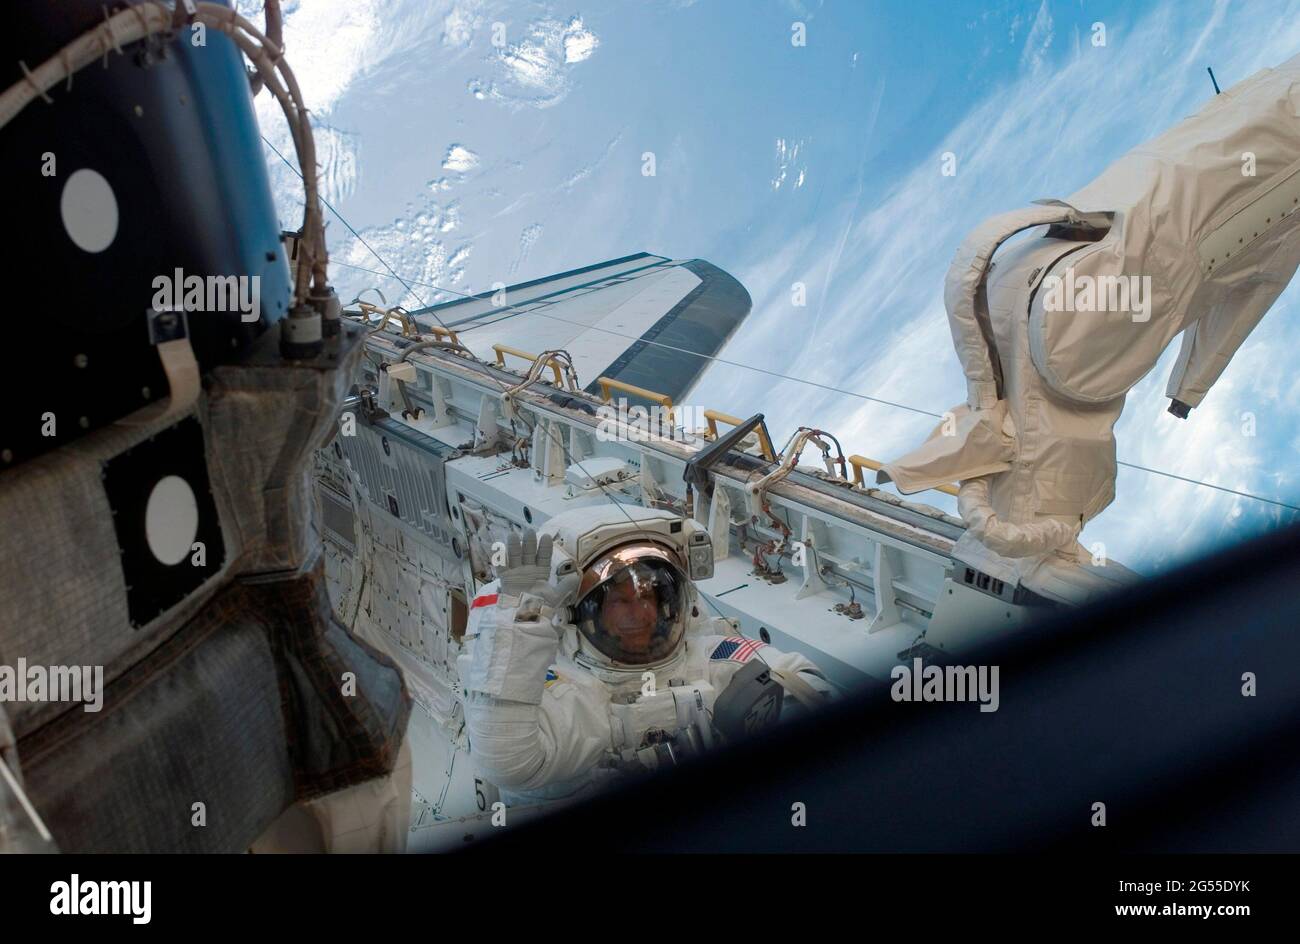 ONBOARD SPACE SHUTTLE DISCOVERY - 08 July 2006 - Astronaut Piers J Sellers, STS-121 mission specialist, waves to a crewmate inside the Space Shuttle D Stock Photo